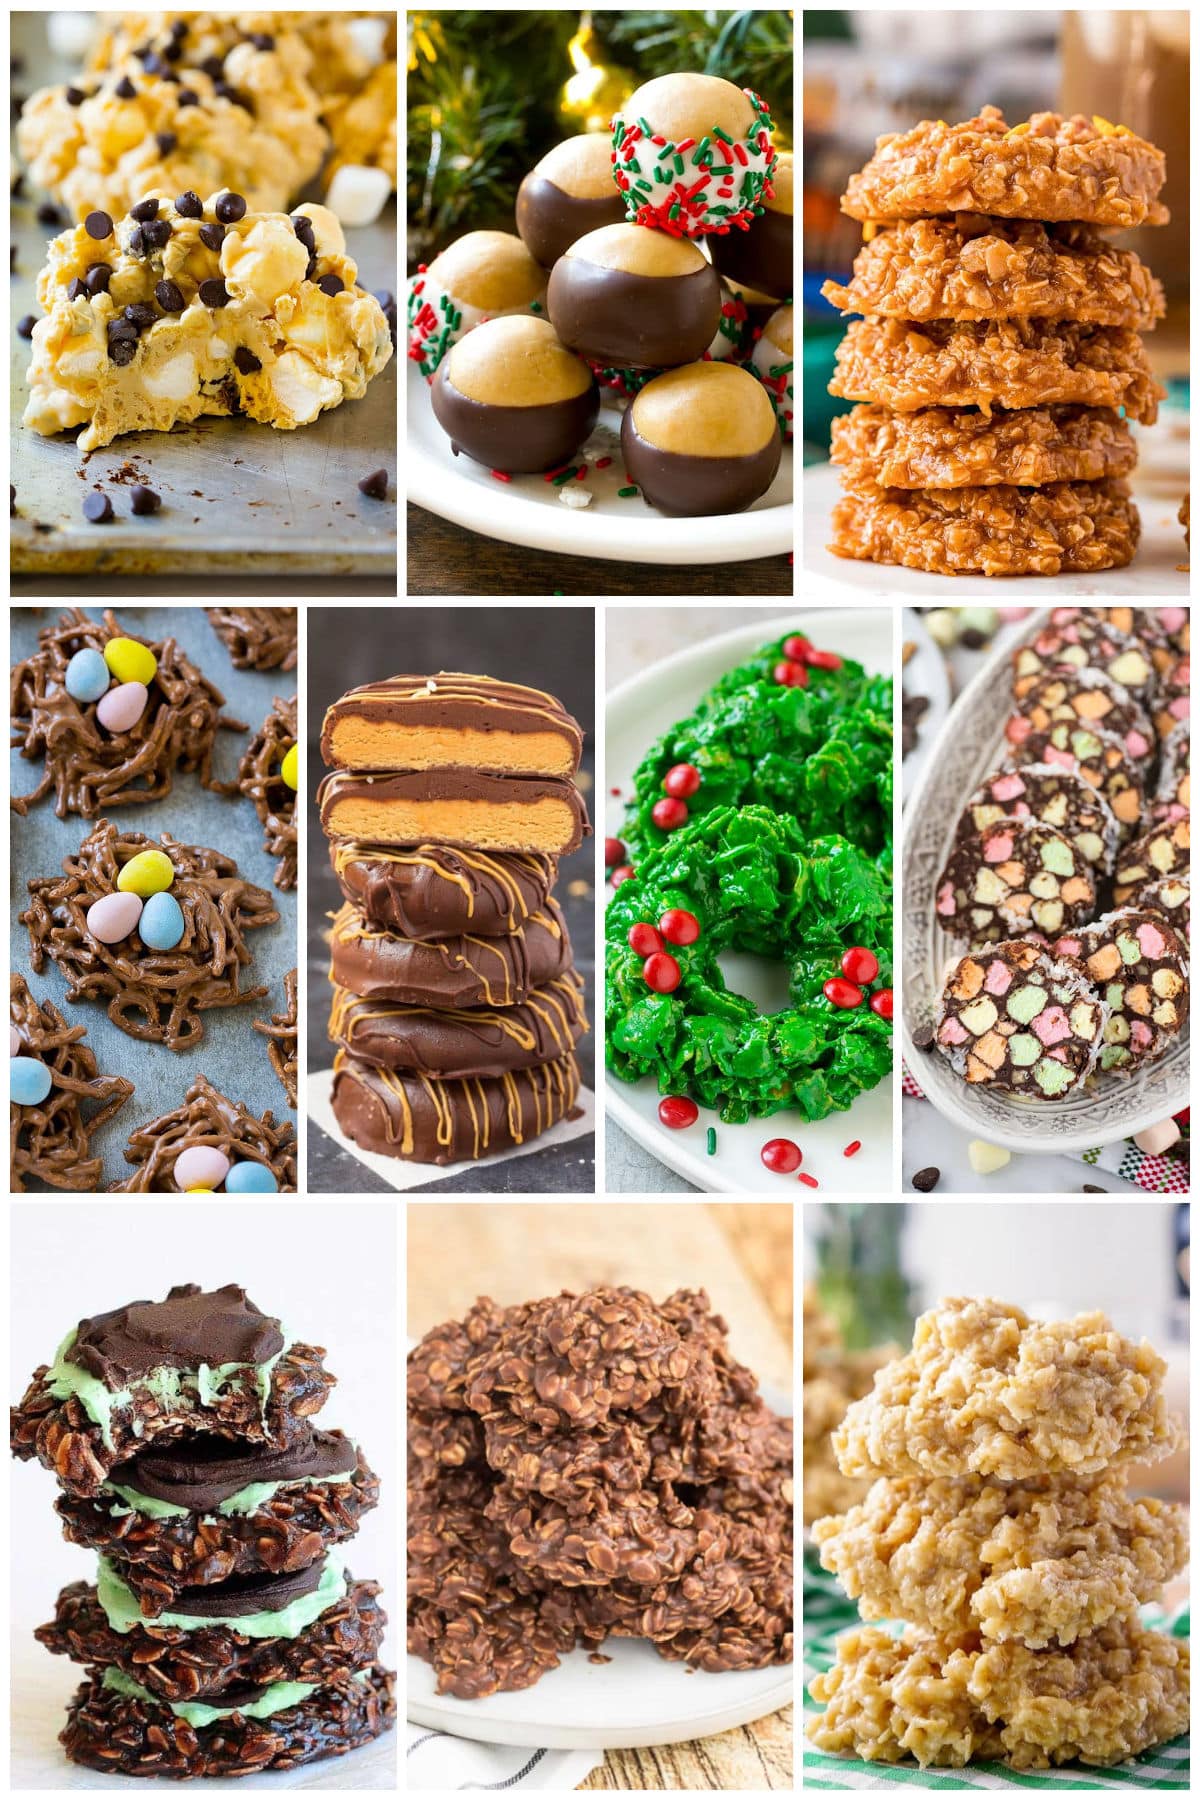 A group of no bake cookie recipes like chocolate peanut butter cookies, buckeye balls and church window cookies.